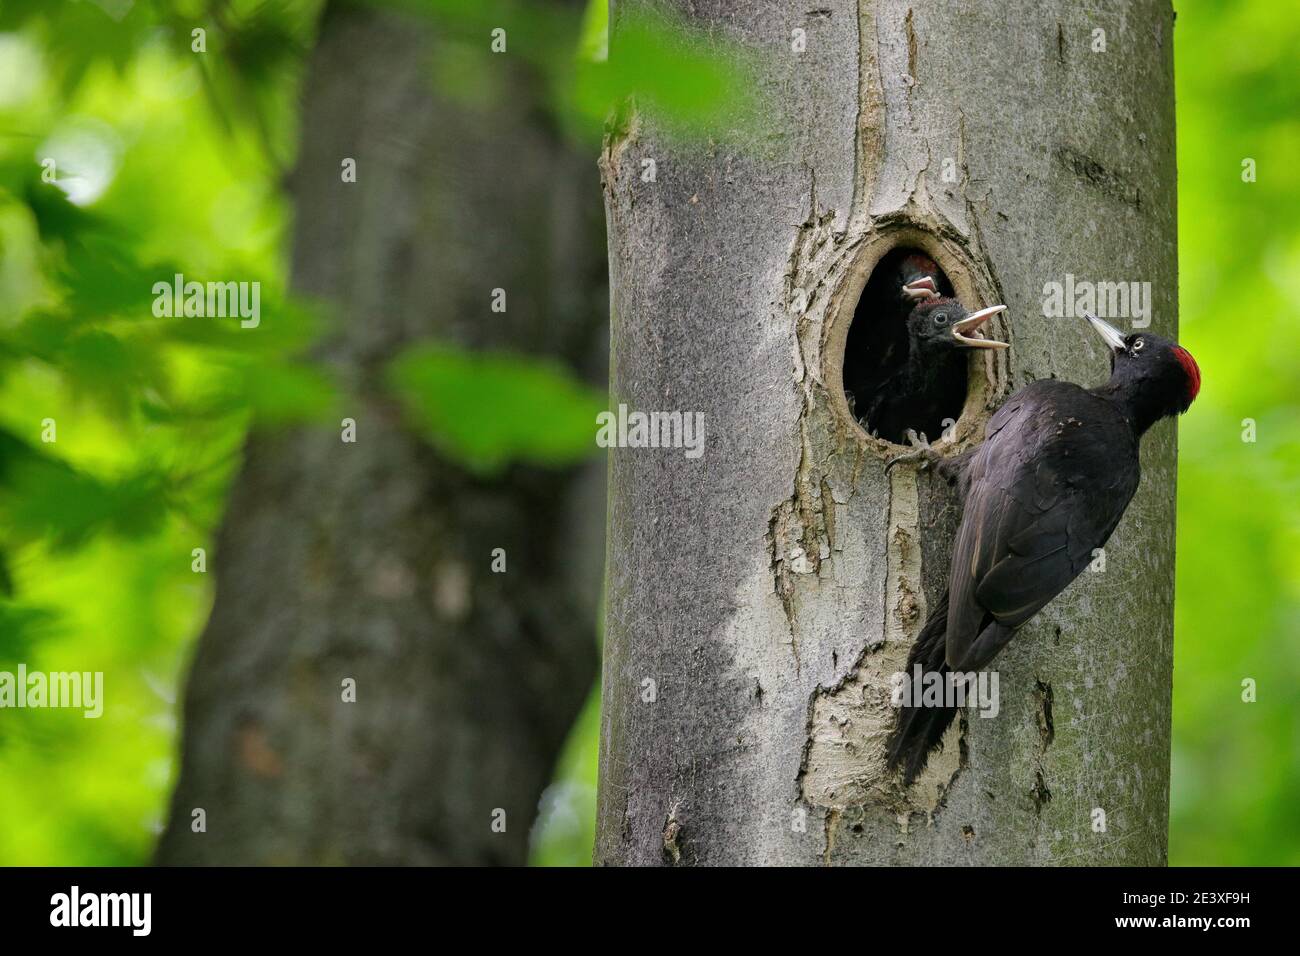 Woodpecker with chick in the nesting hole. Black woodpecker in the green summer forest. Wildlife scene with black bird in the nature habitat. Stock Photo